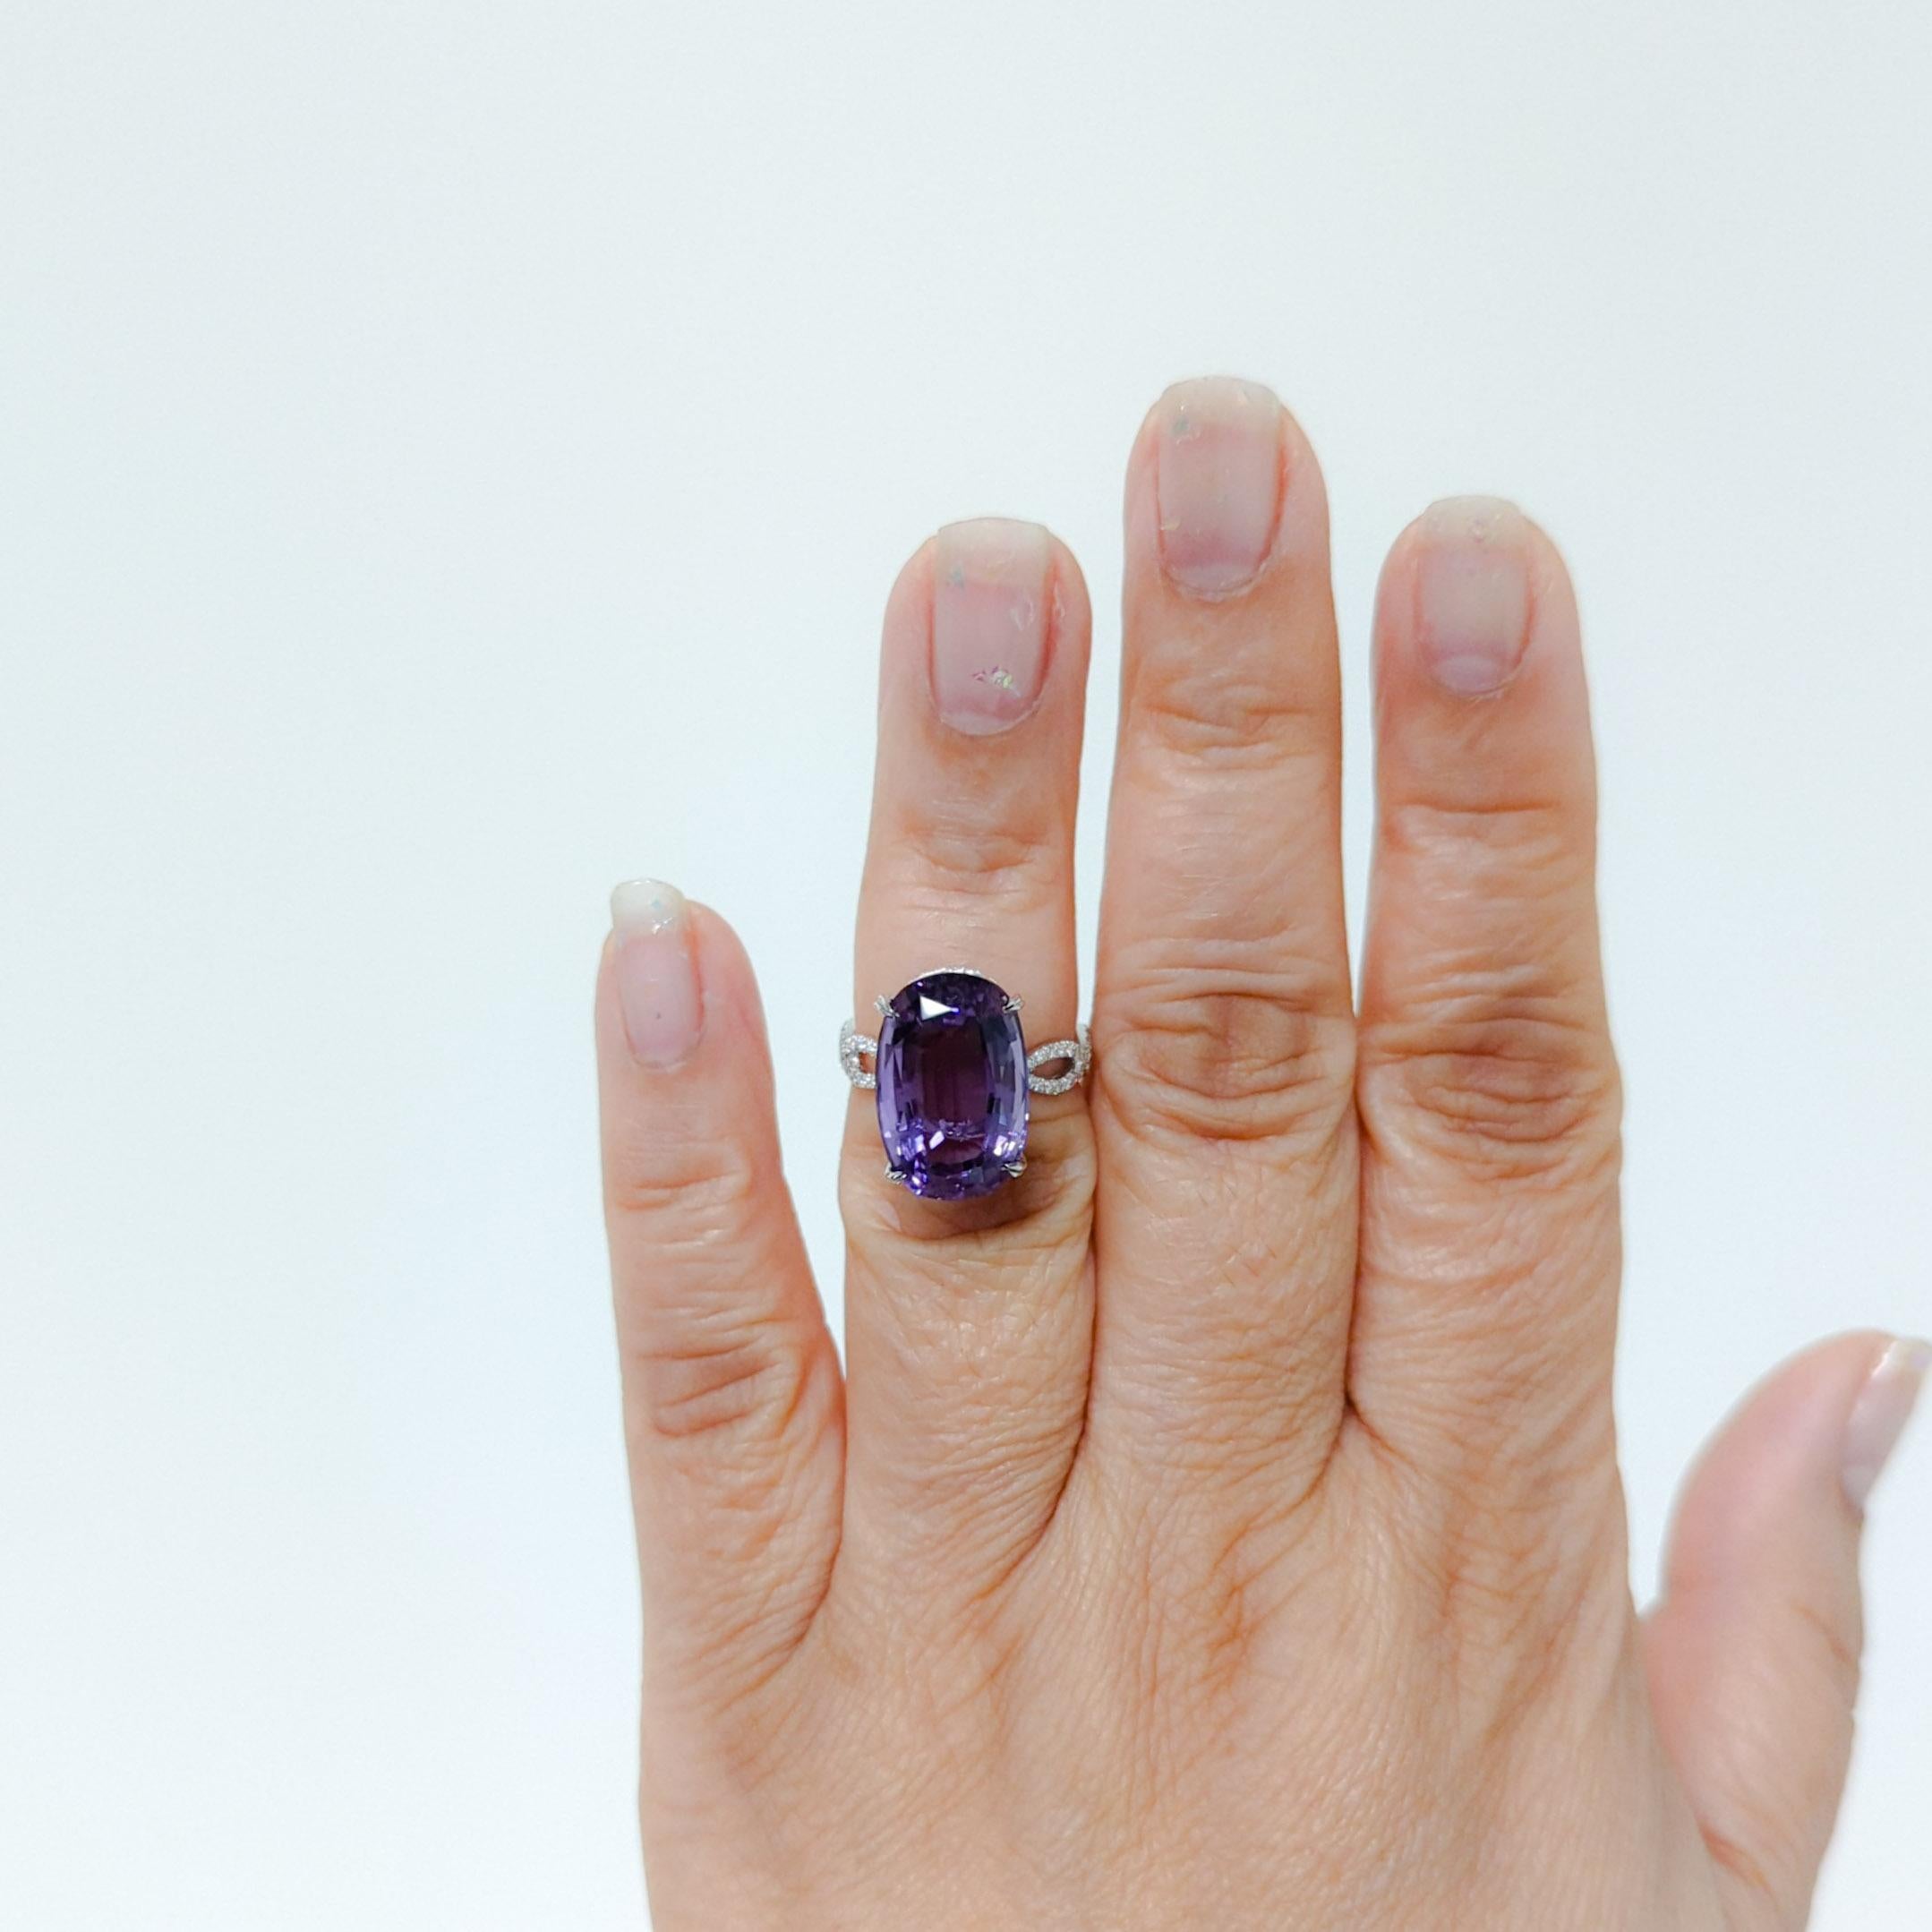 Gorgeous 10.20 ct. amethyst oval with 0.33 ct. good quality white diamond rounds.  Handmade in 18k white gold.  The braided band is so pretty and delicate.  Ring size 5.75.  Can be resized up or down one to two sizes only because of the braided